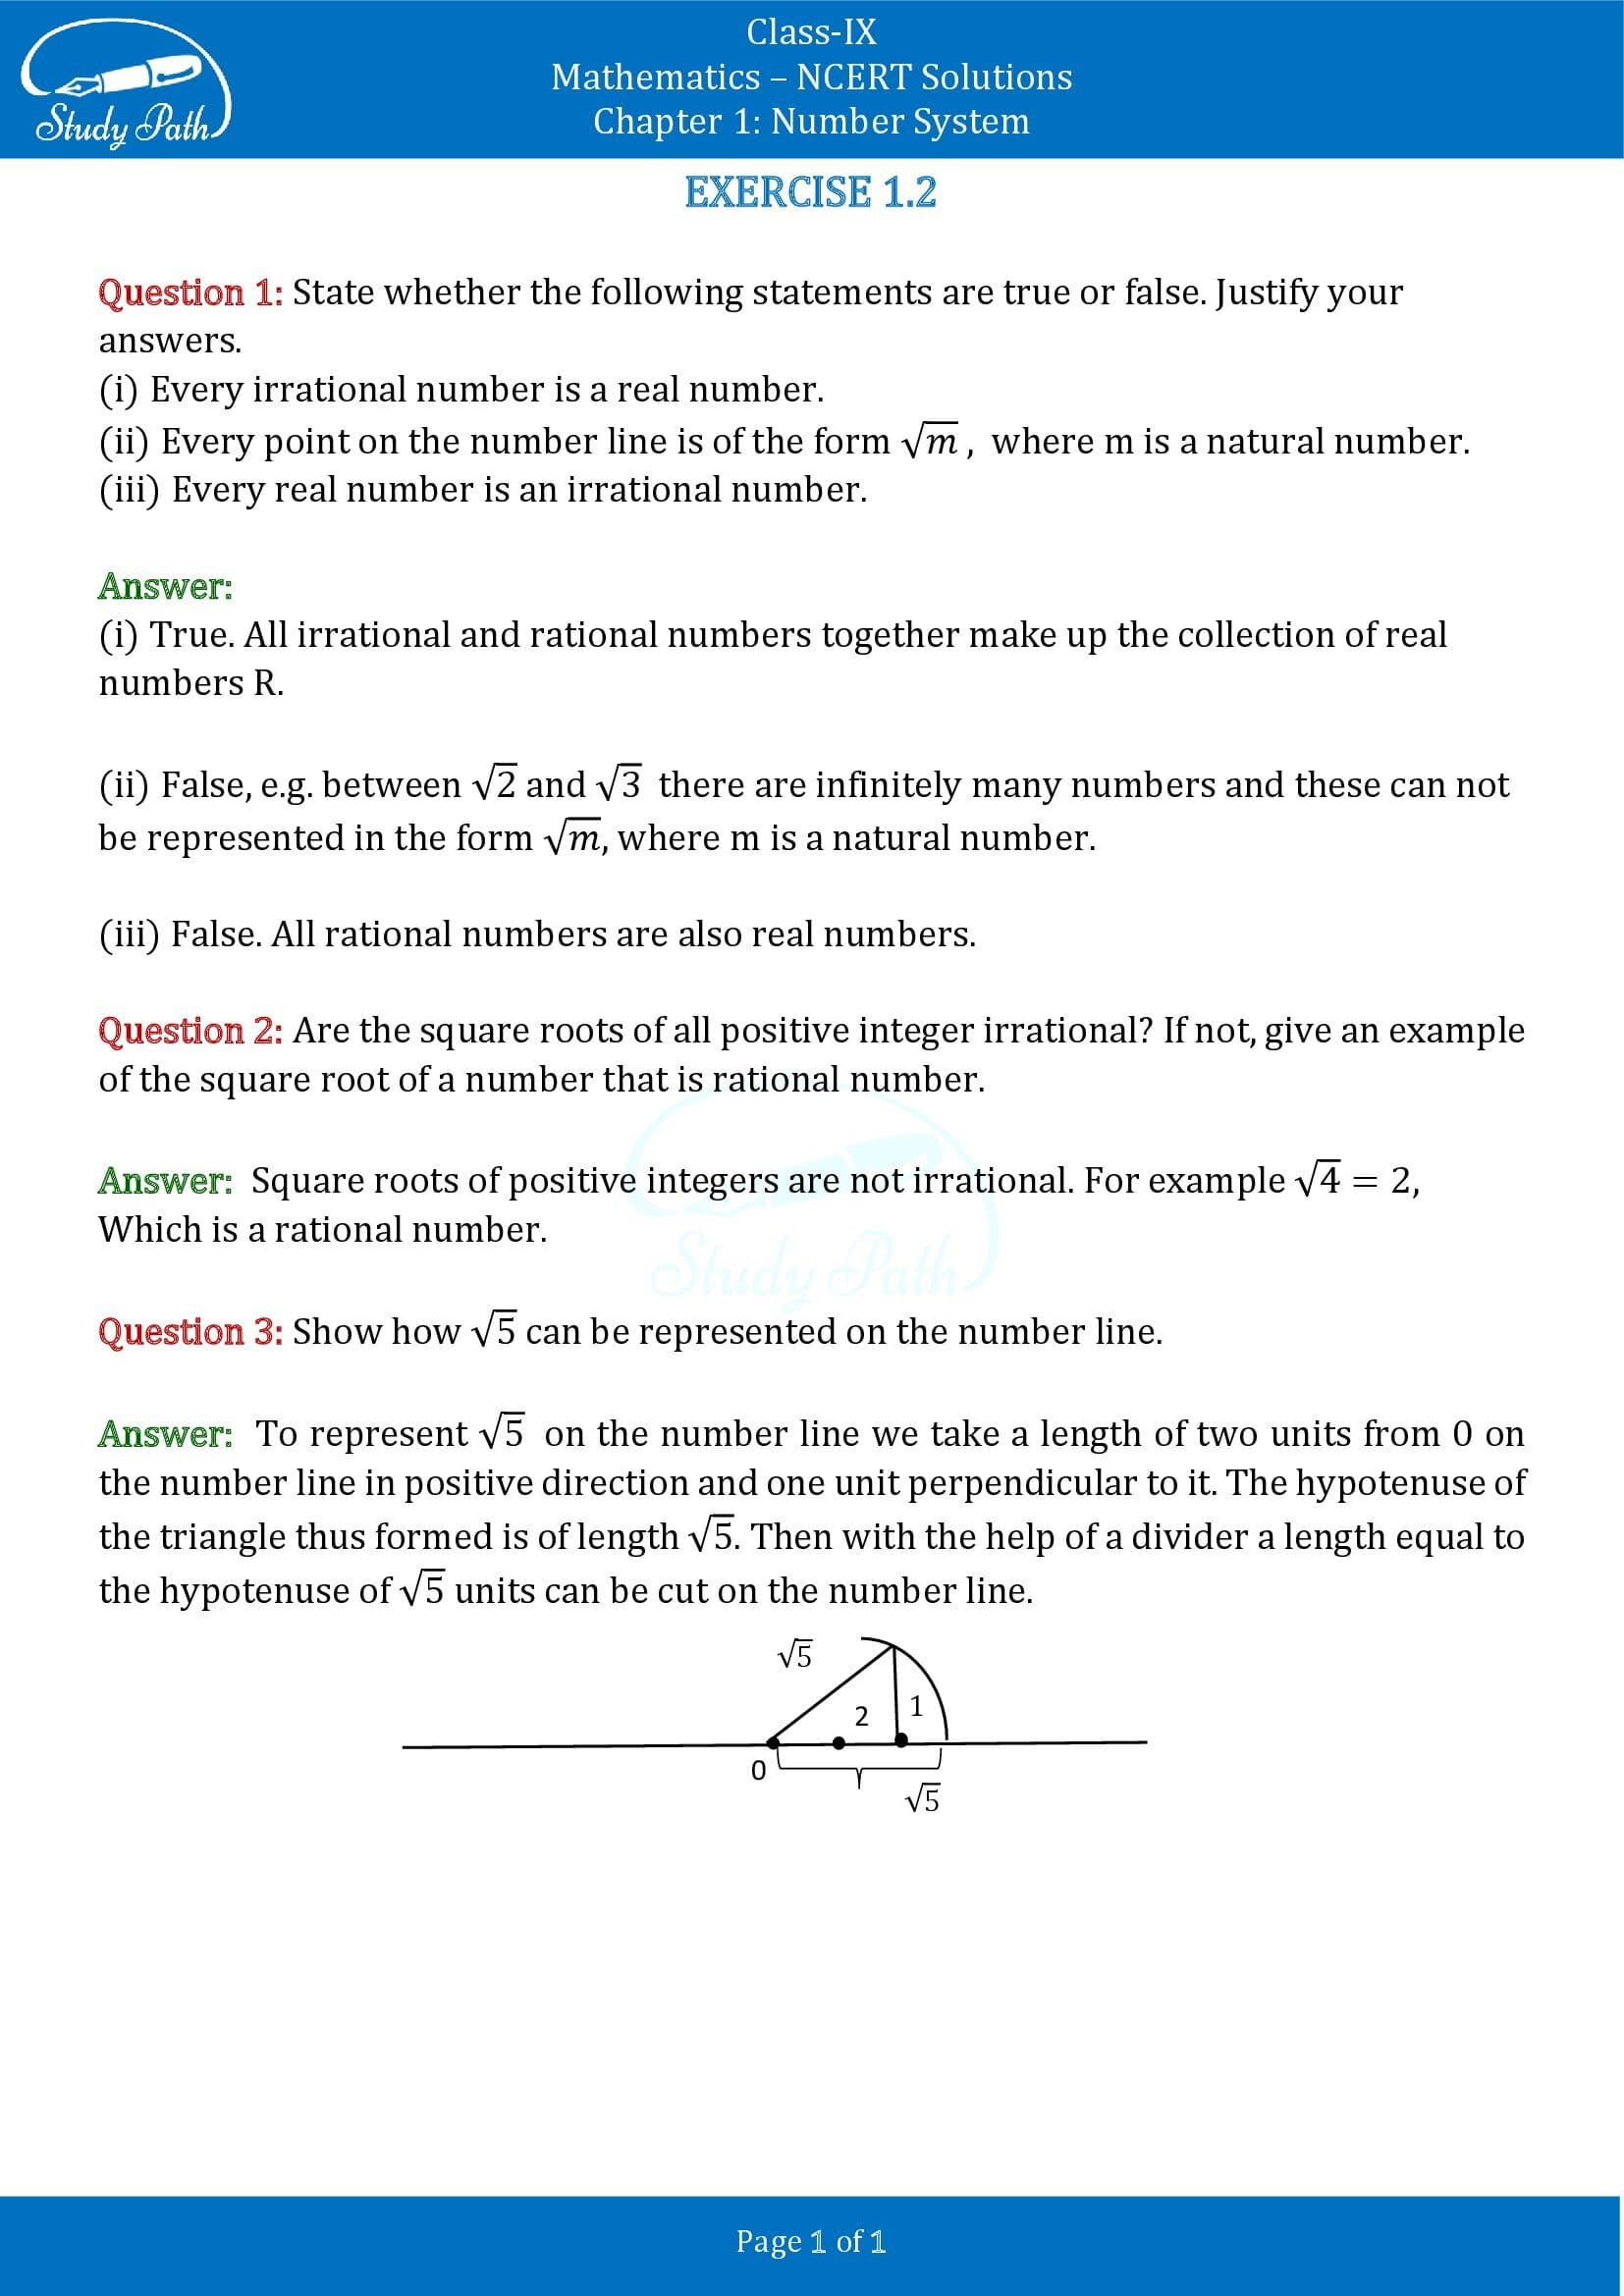 NCERT Solutions for Class 9 Maths Chapter 1 Number System Exercise 1.2